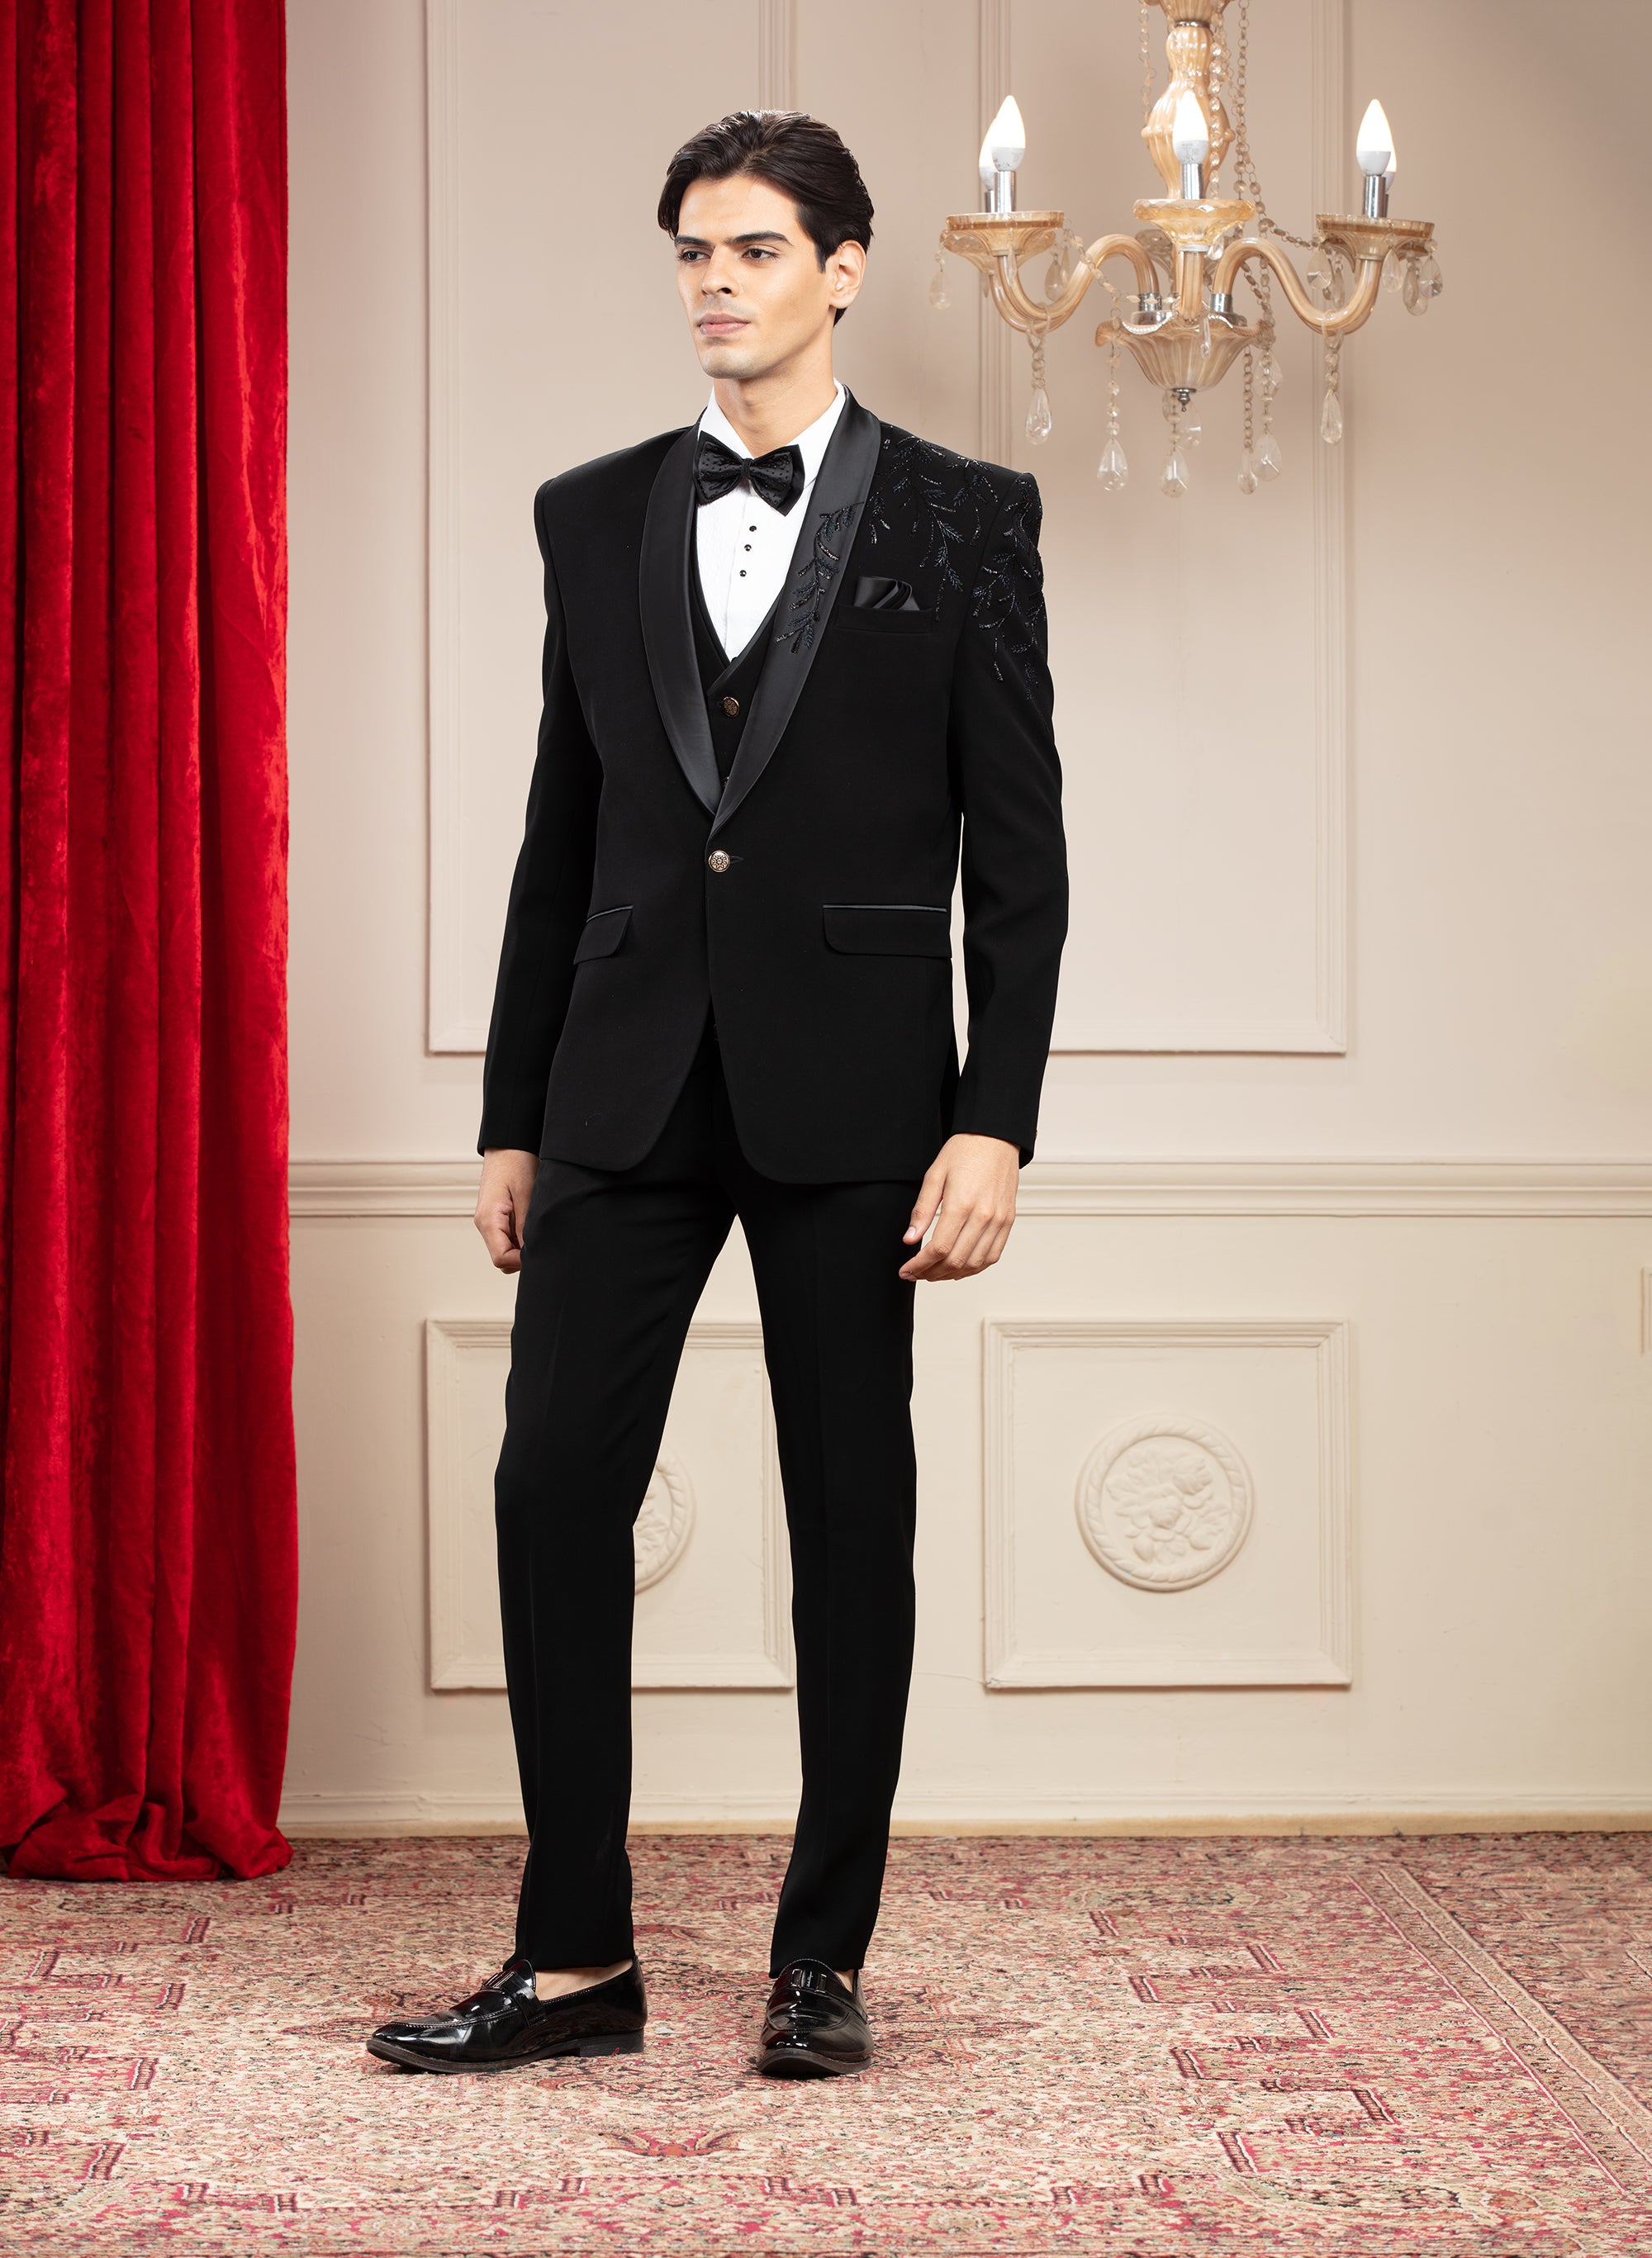 Jet Black Tuxedo with hand embroidery and bow tie